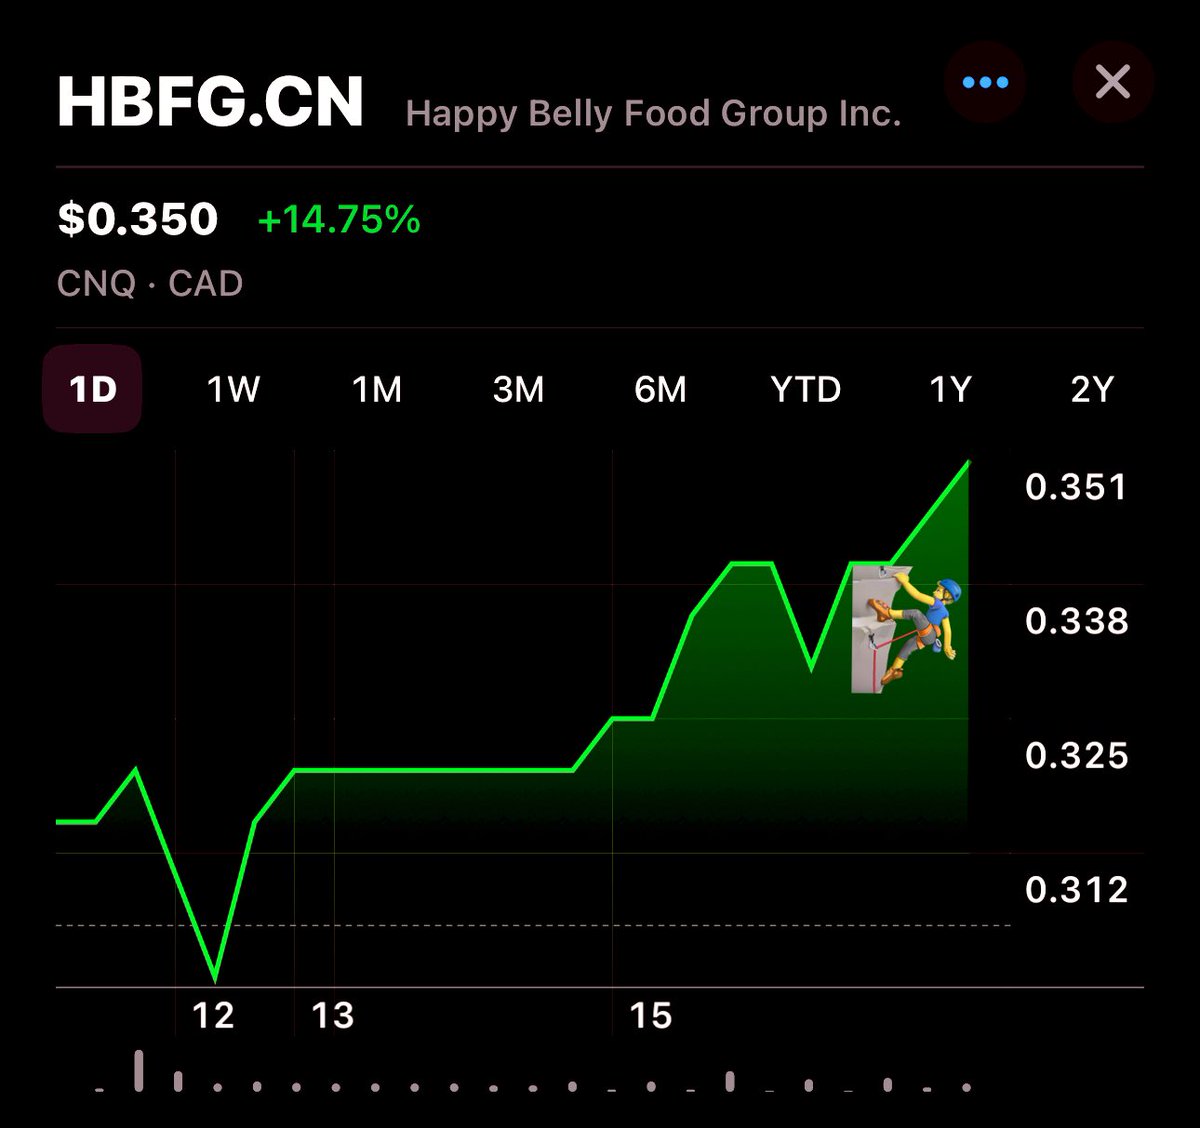 The beast woke up today & it’s no April’s fool joke $HBFG 

Stock closed up almost 15% @ 0.35$ on a solid 180K shares traded 📈

We expect lot of action in the coming weeks with fins on their way & no recent #insiderbuying which might indicate something’s brewing 👀

$HBFG / SH